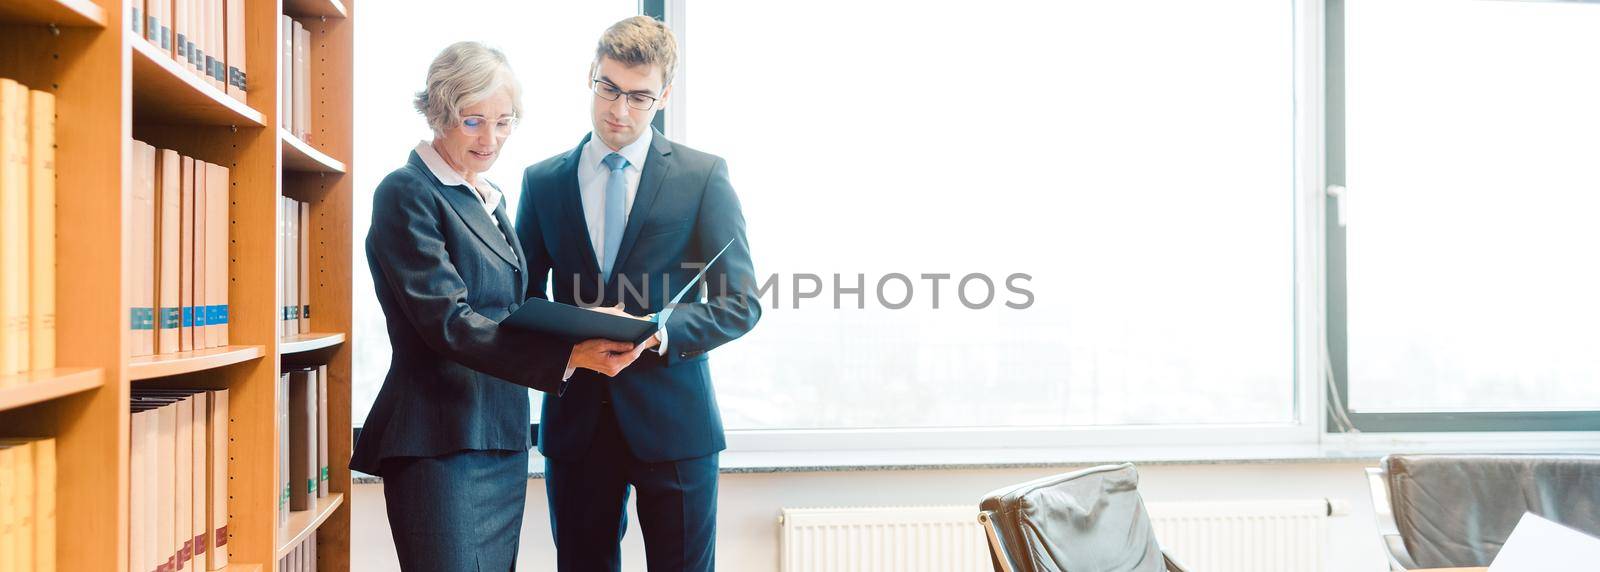 Senior and junior lawyer in law firm discussing strategy in a case by Kzenon